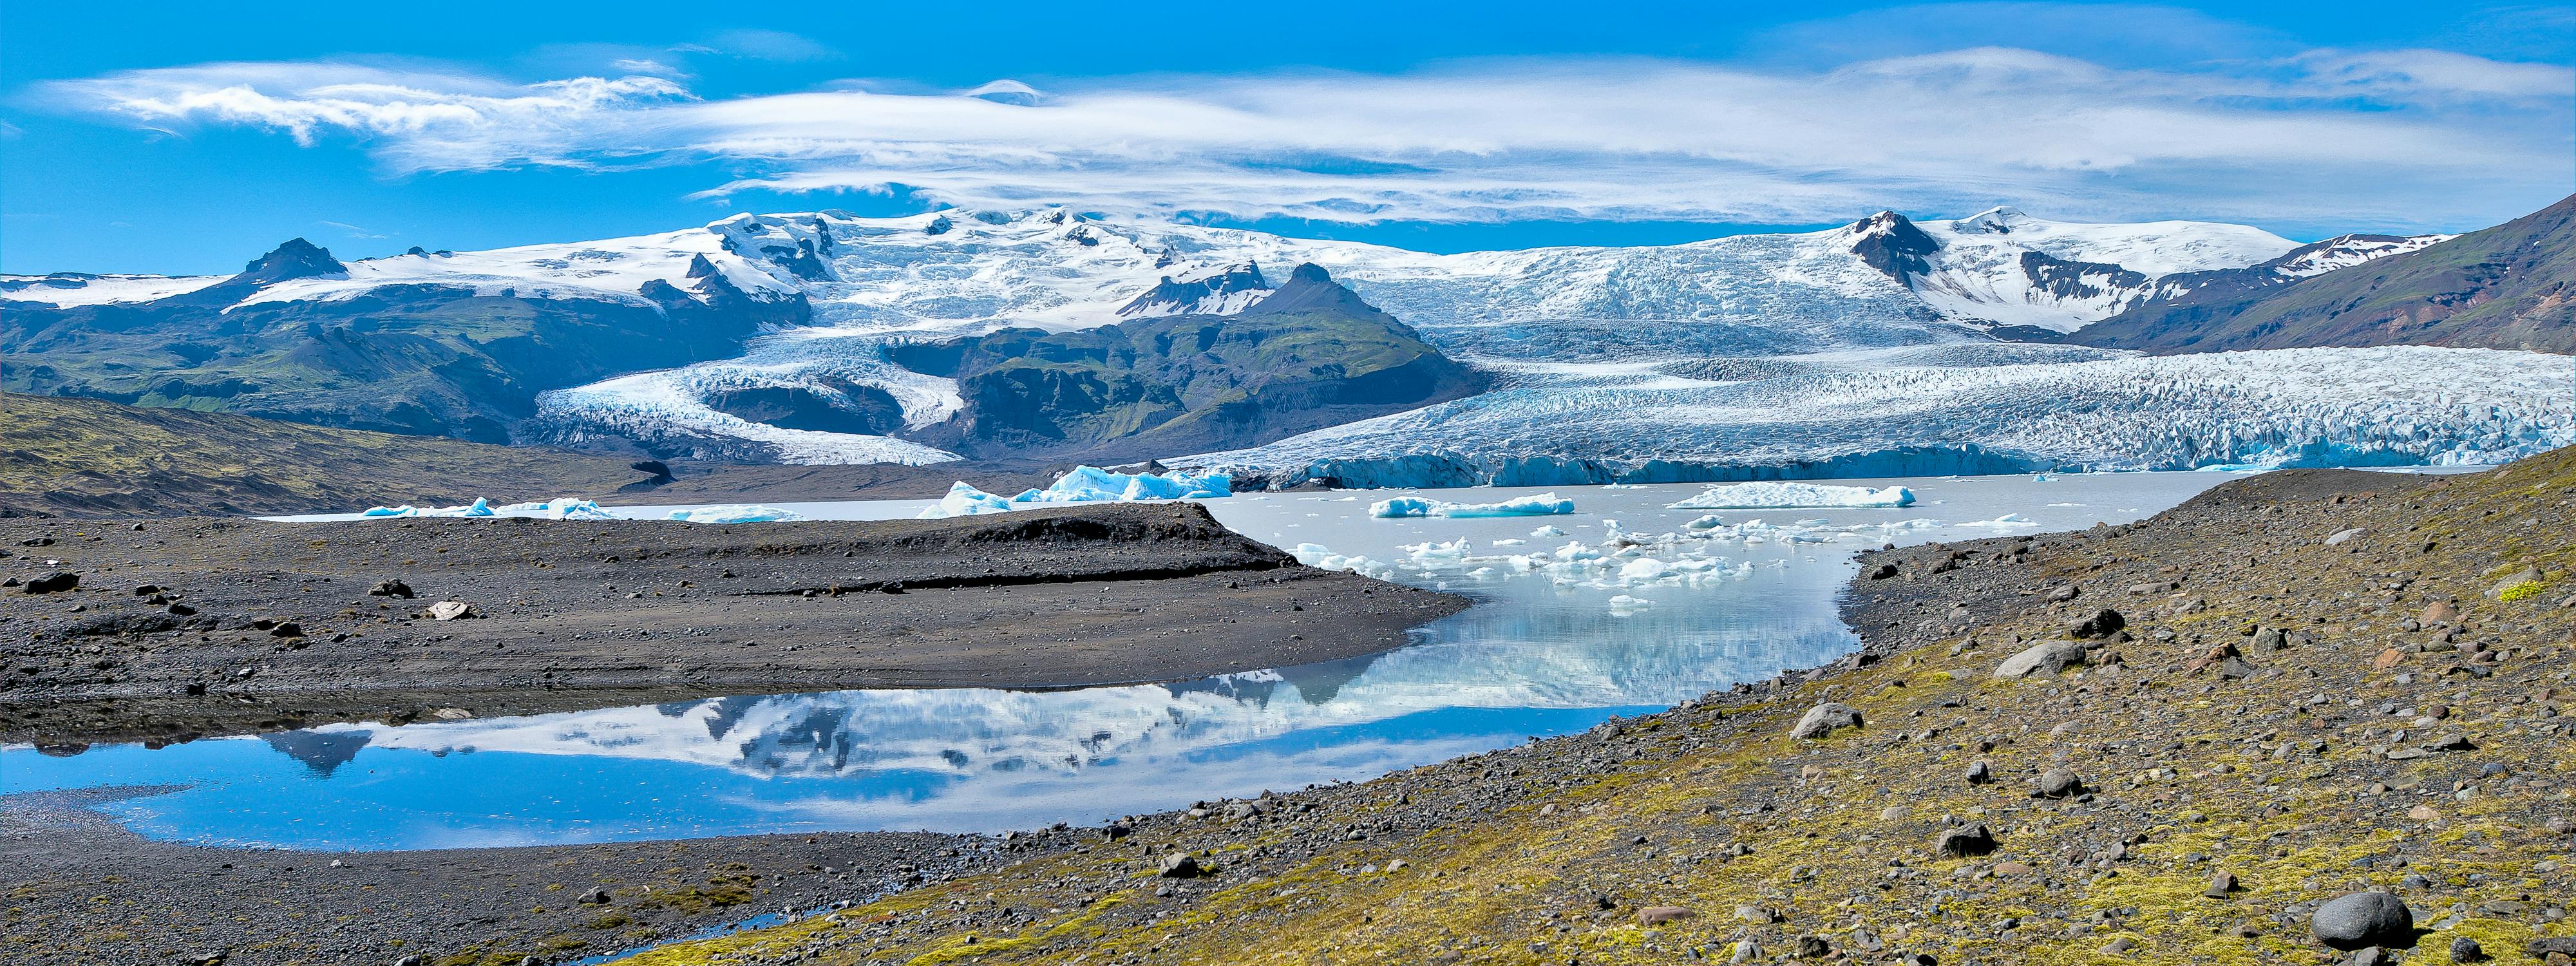 A glacier lake with icebergs in front of a river of ice flowing from an ice-covered volcano